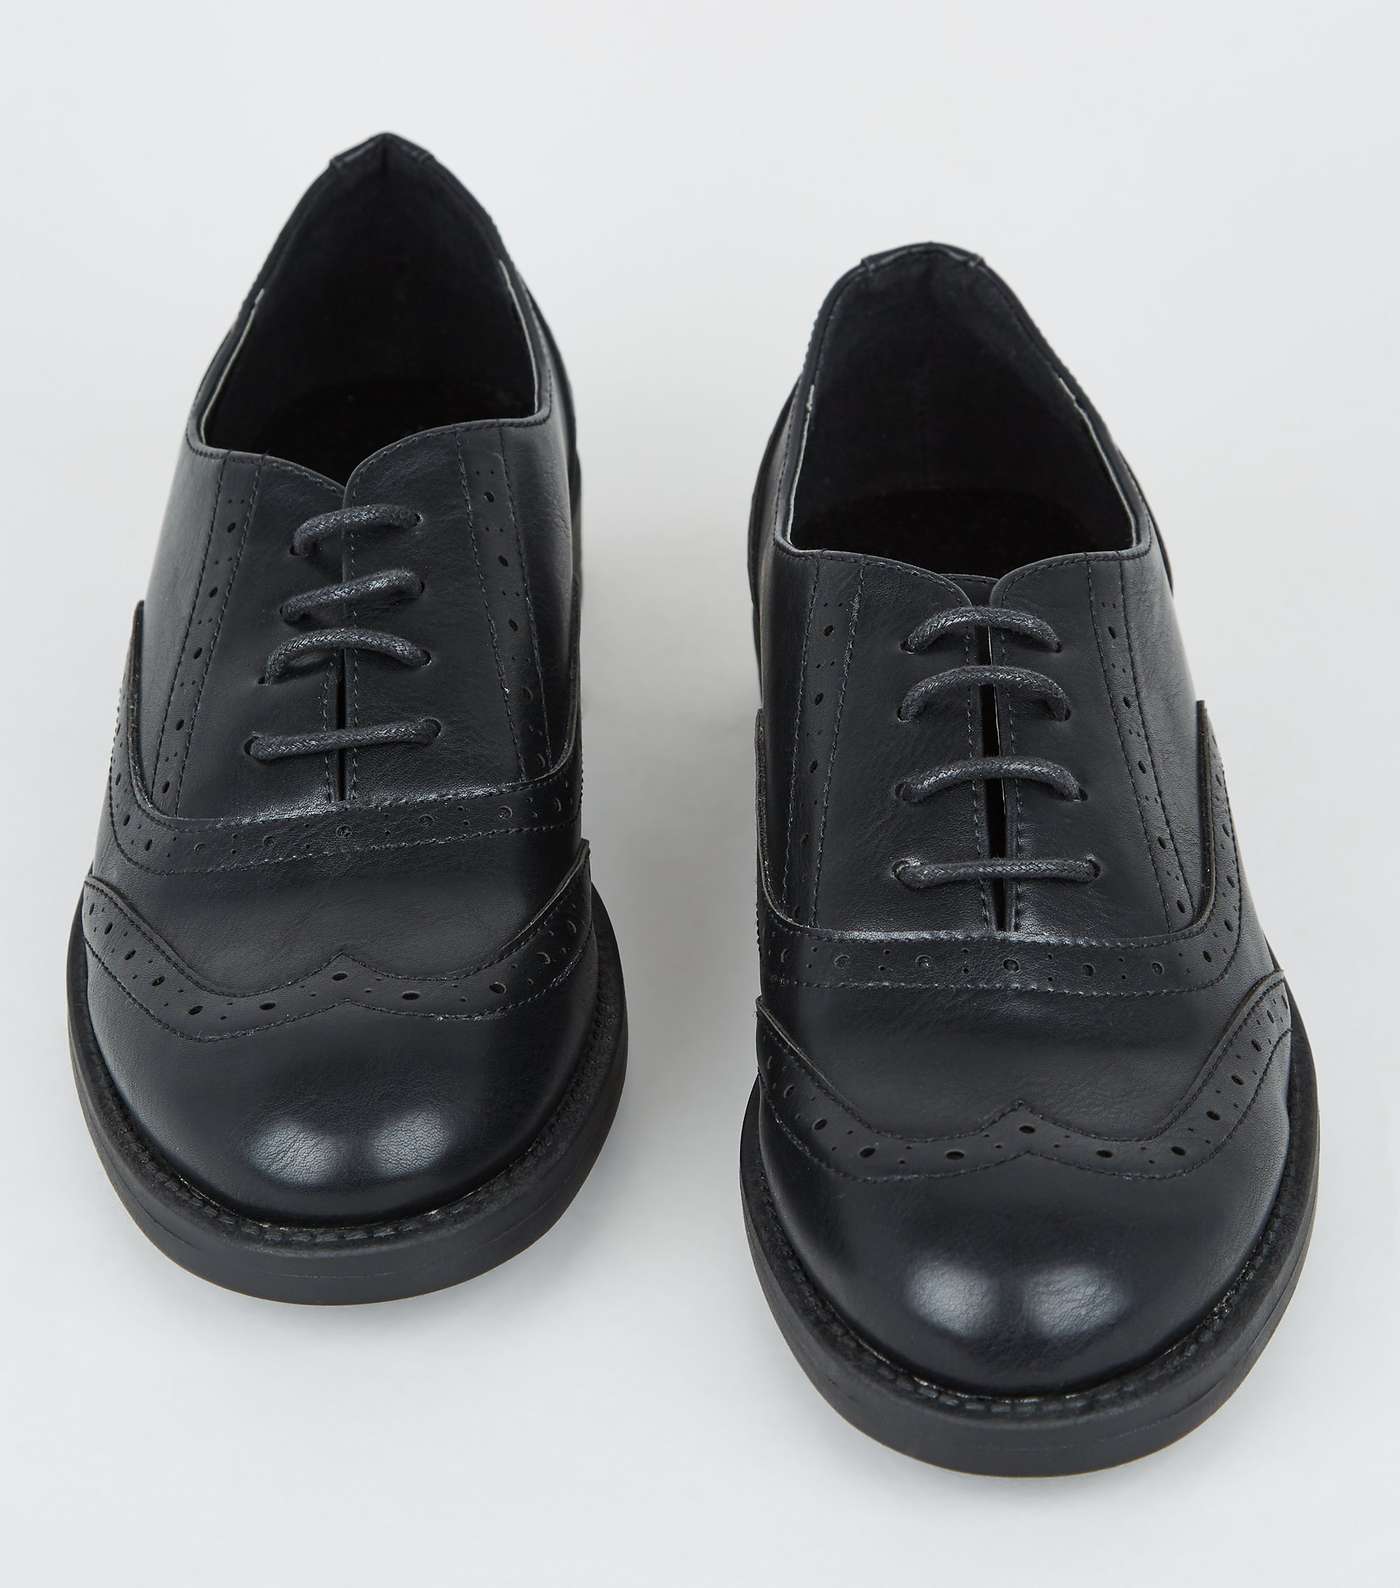 Girls Black Leather-Look Brogues Image 3